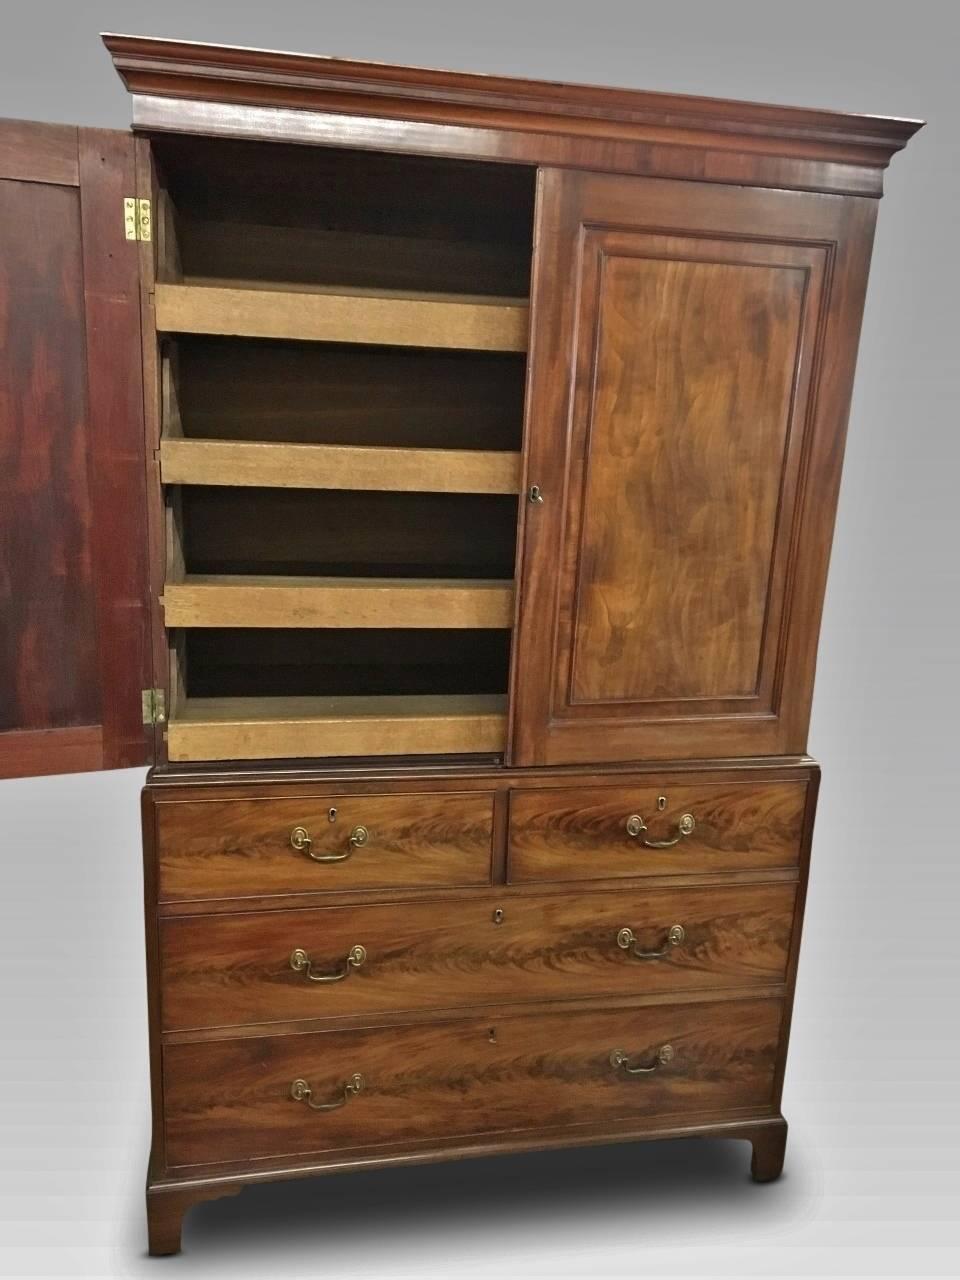 Fine quality mahogany line press, English, circa 1800.
This delightful antique press is in super condition. Standing on Bracket feet, there are 4 smoothly running drawers of good depth, all retaining their original handles and locks. Above this,